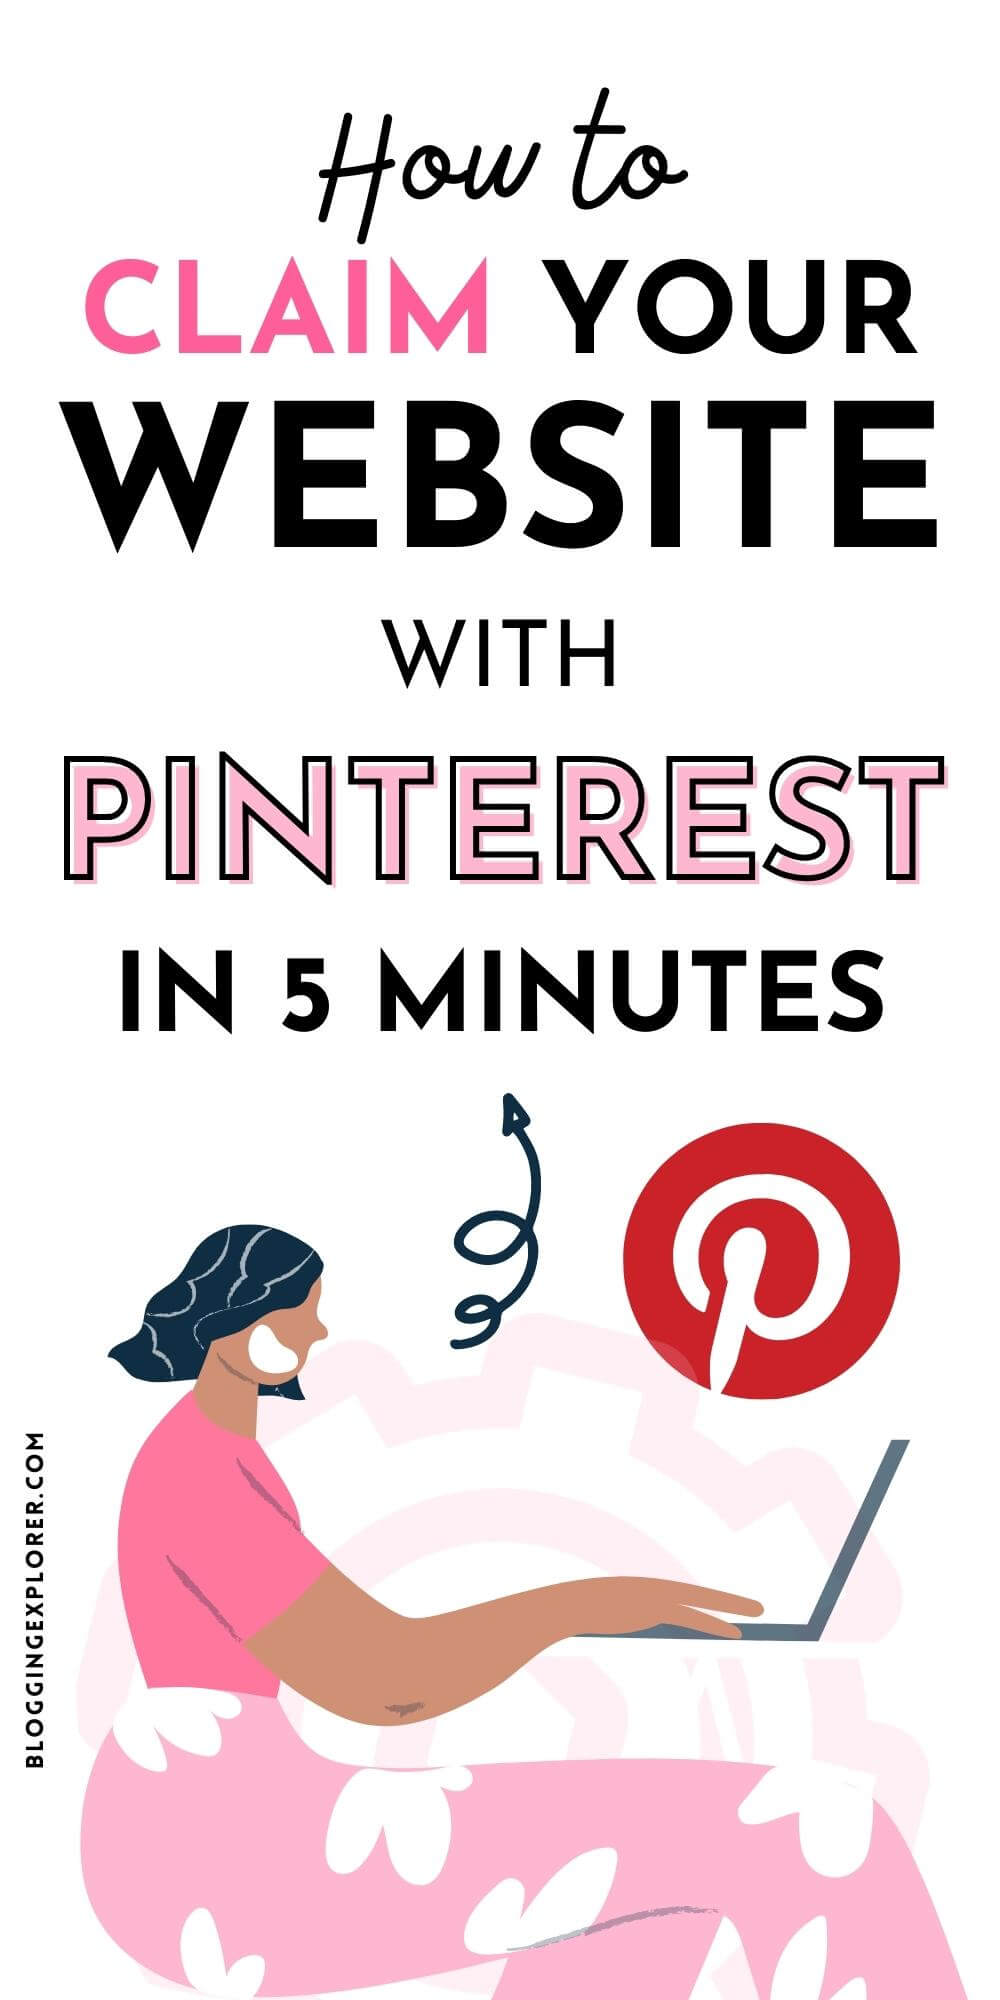 How to claim your website with Pinterest in 5 minutes